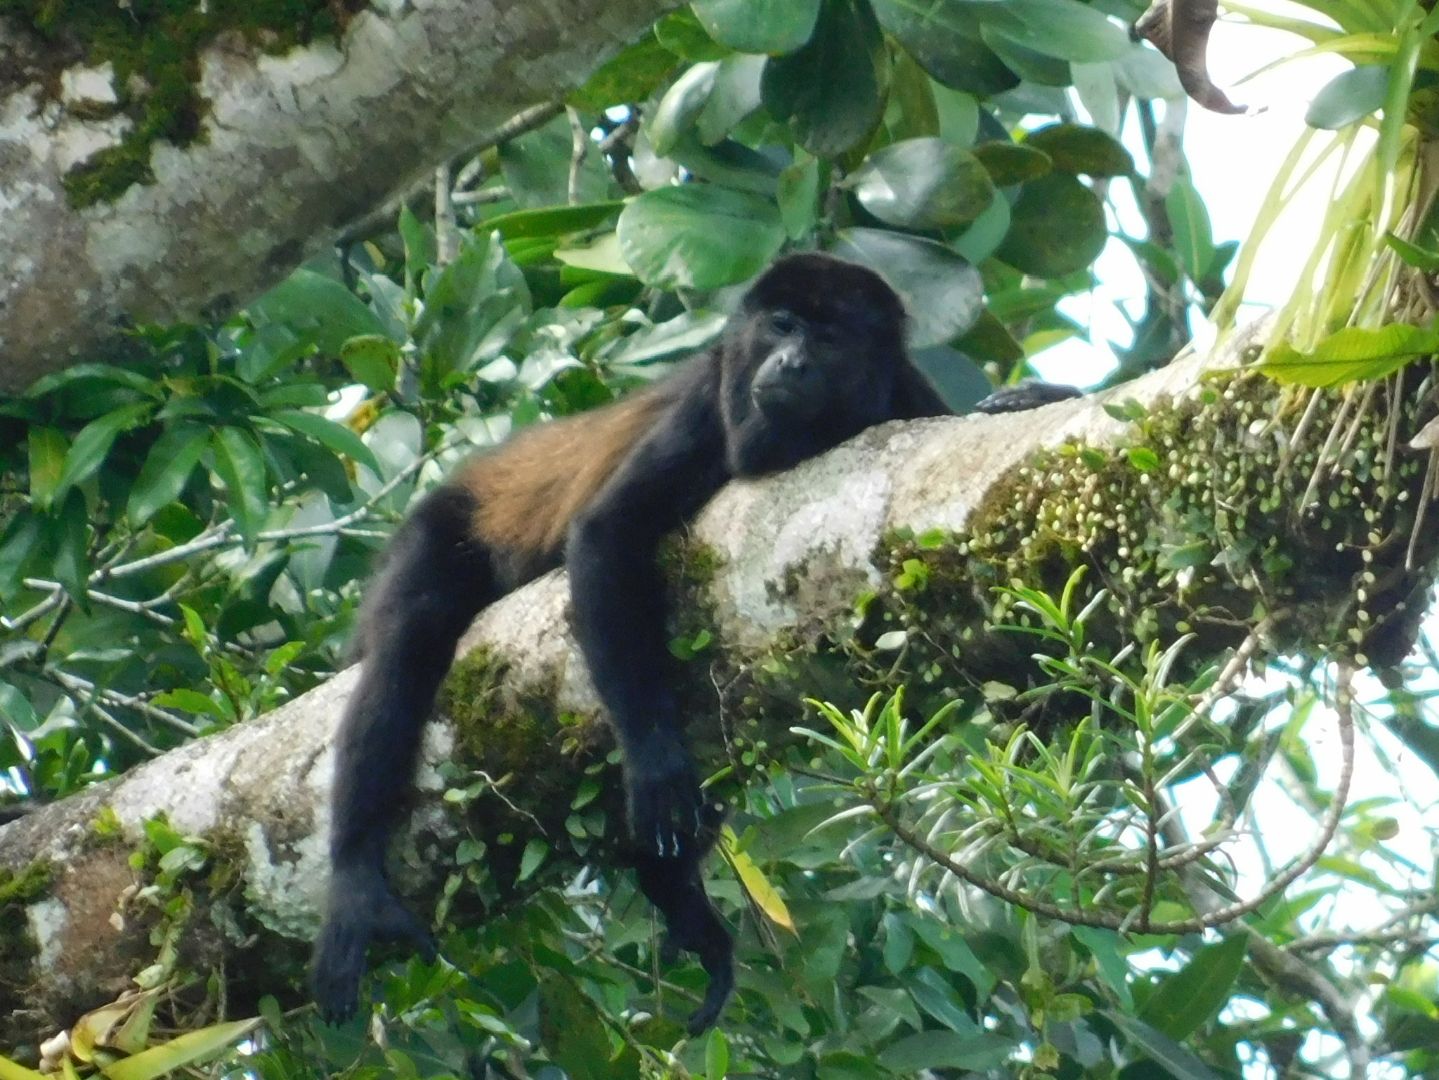 Monkey laying on branch in rainforest